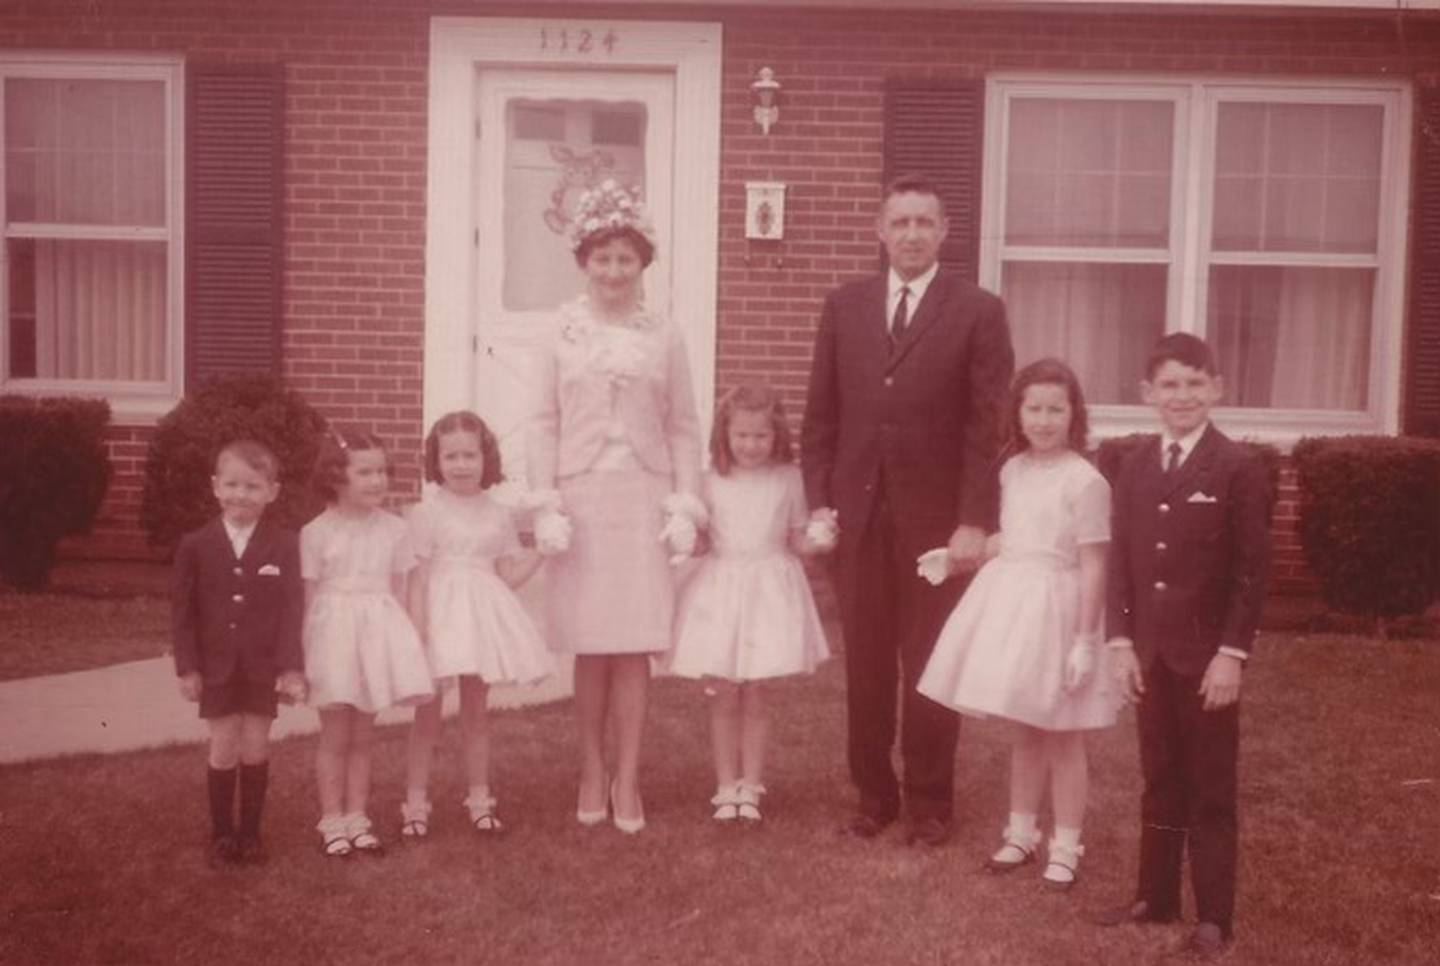 Lockport native Tom Flavin and his wife Lois Flavin had nine children: Mike, Cathy, Margie, Sue, Nancy, Joe, Johnnie, Eddie and Patrick. Six of them are pictured here.